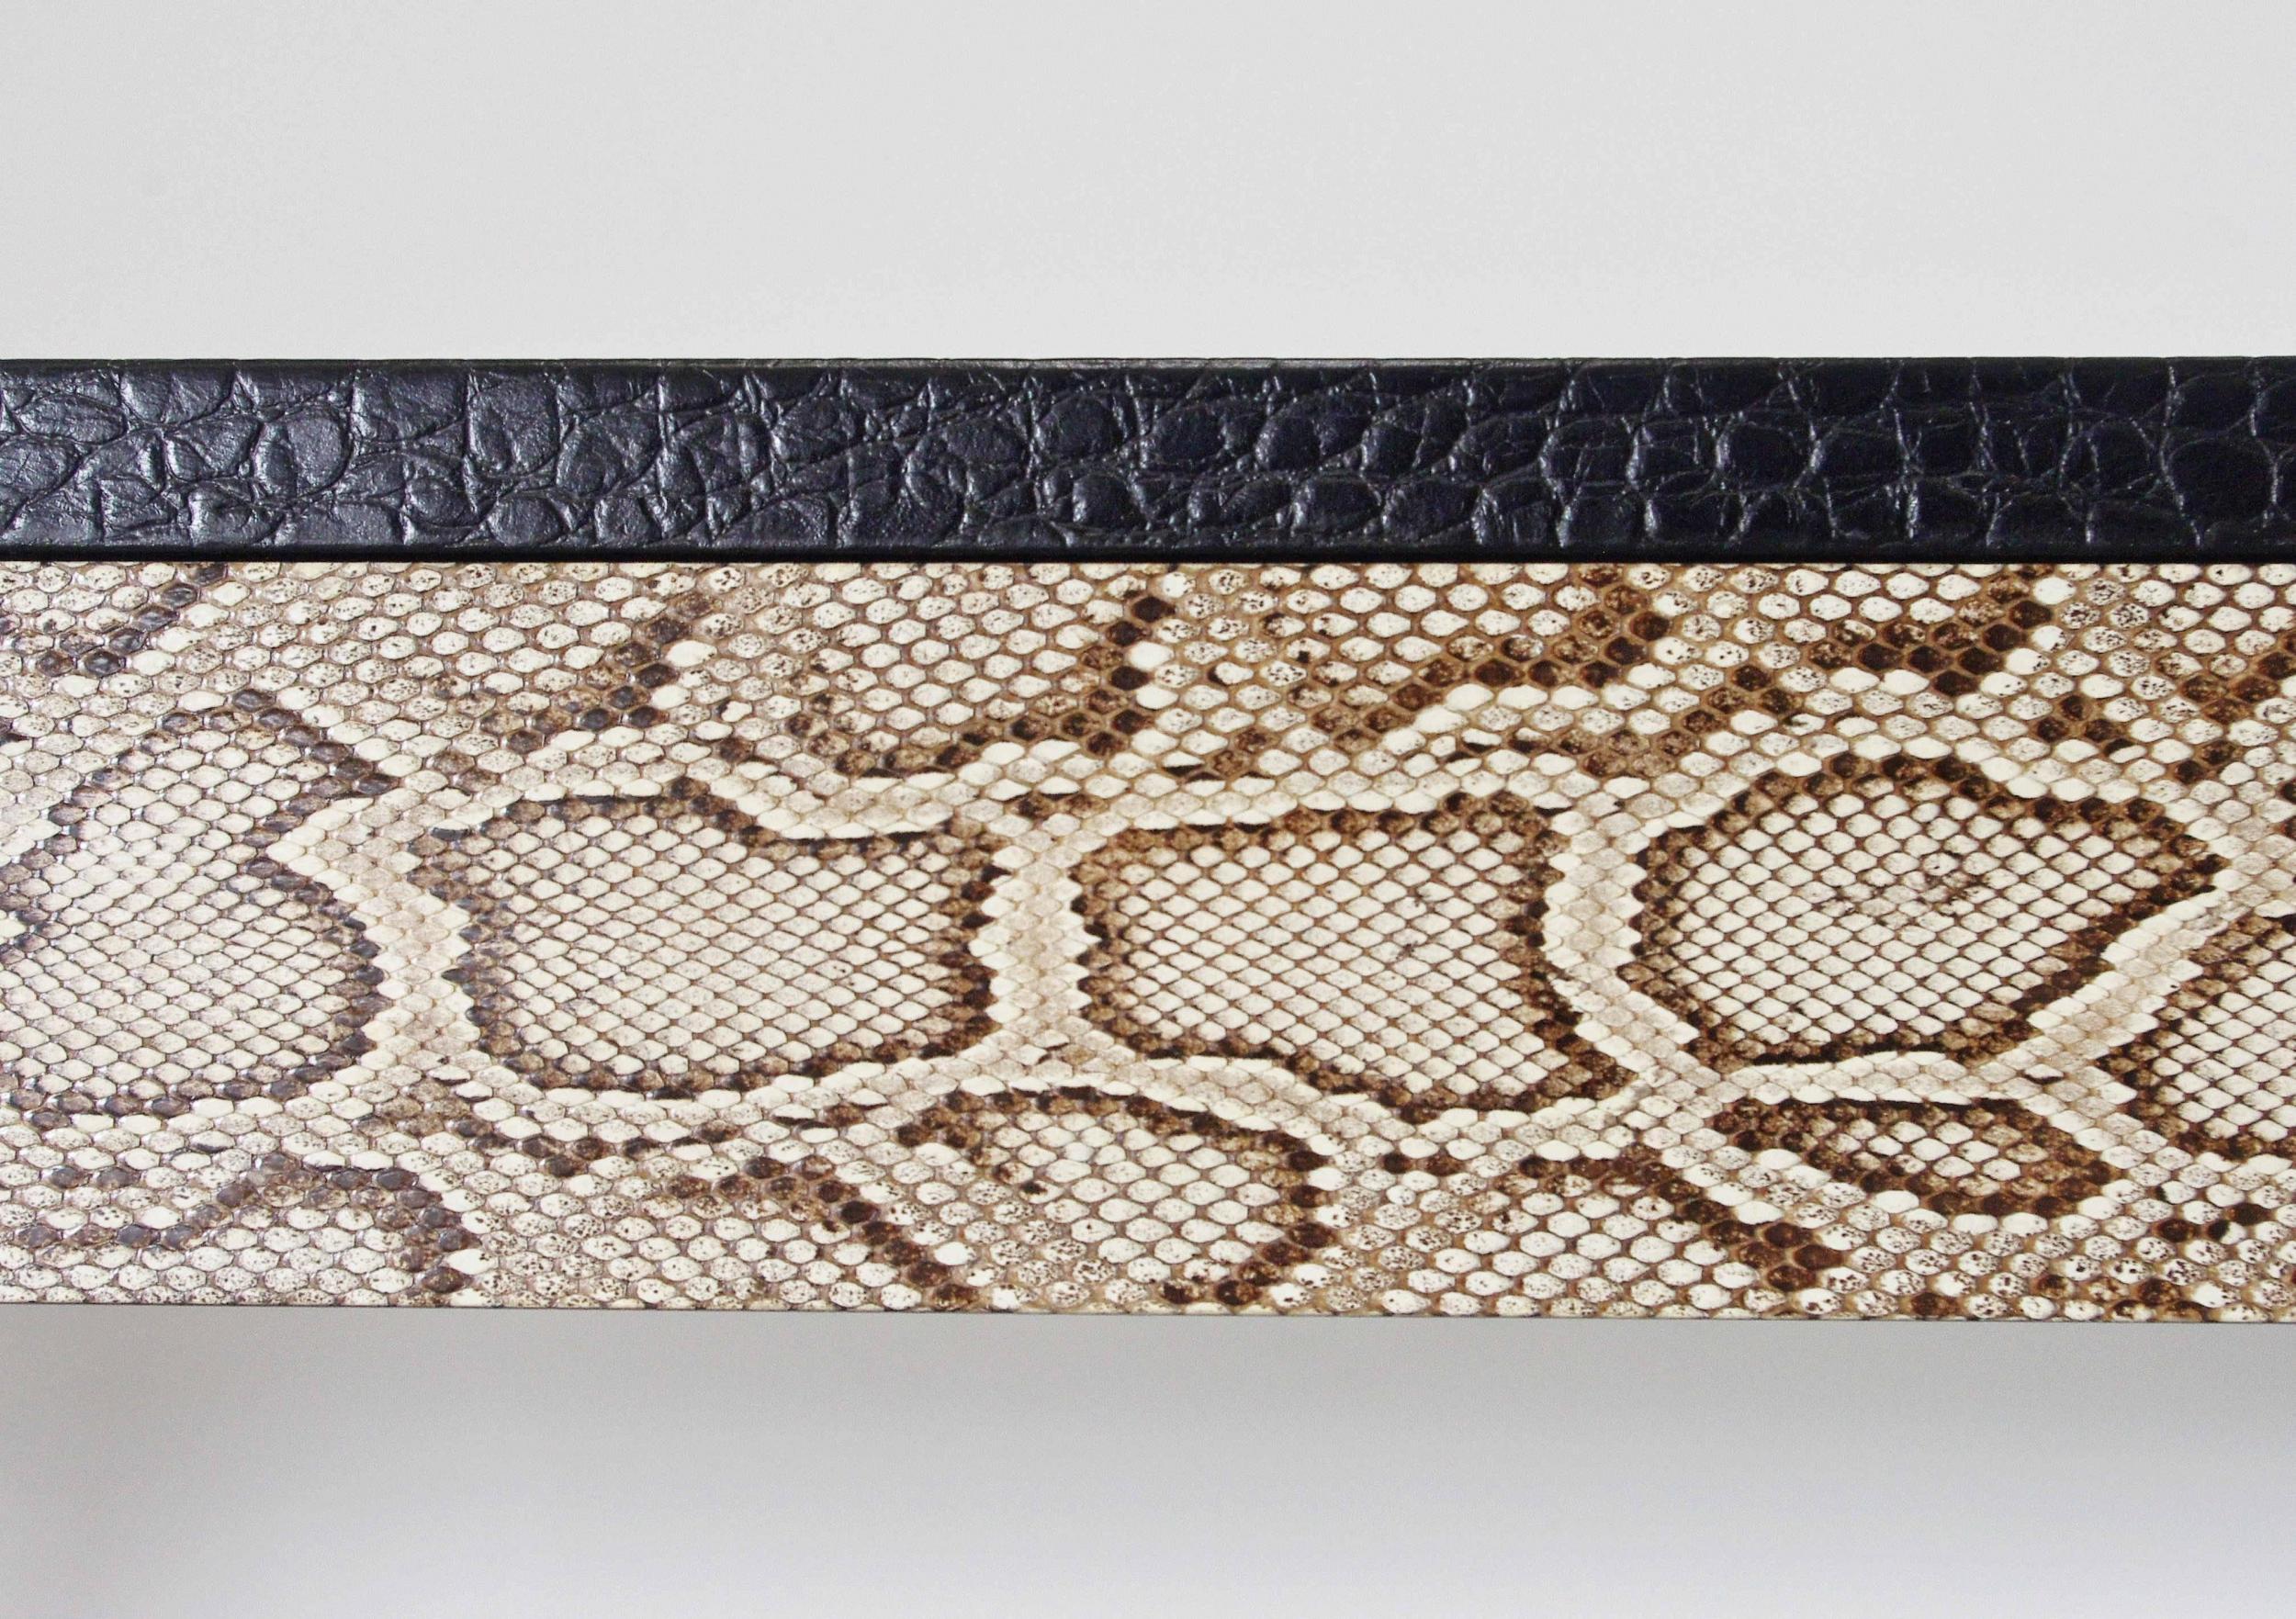 Late 20th Century Chic Console Table w/ Black Leather & Snake Skin Attrib. to Karl Springer, 1970s For Sale